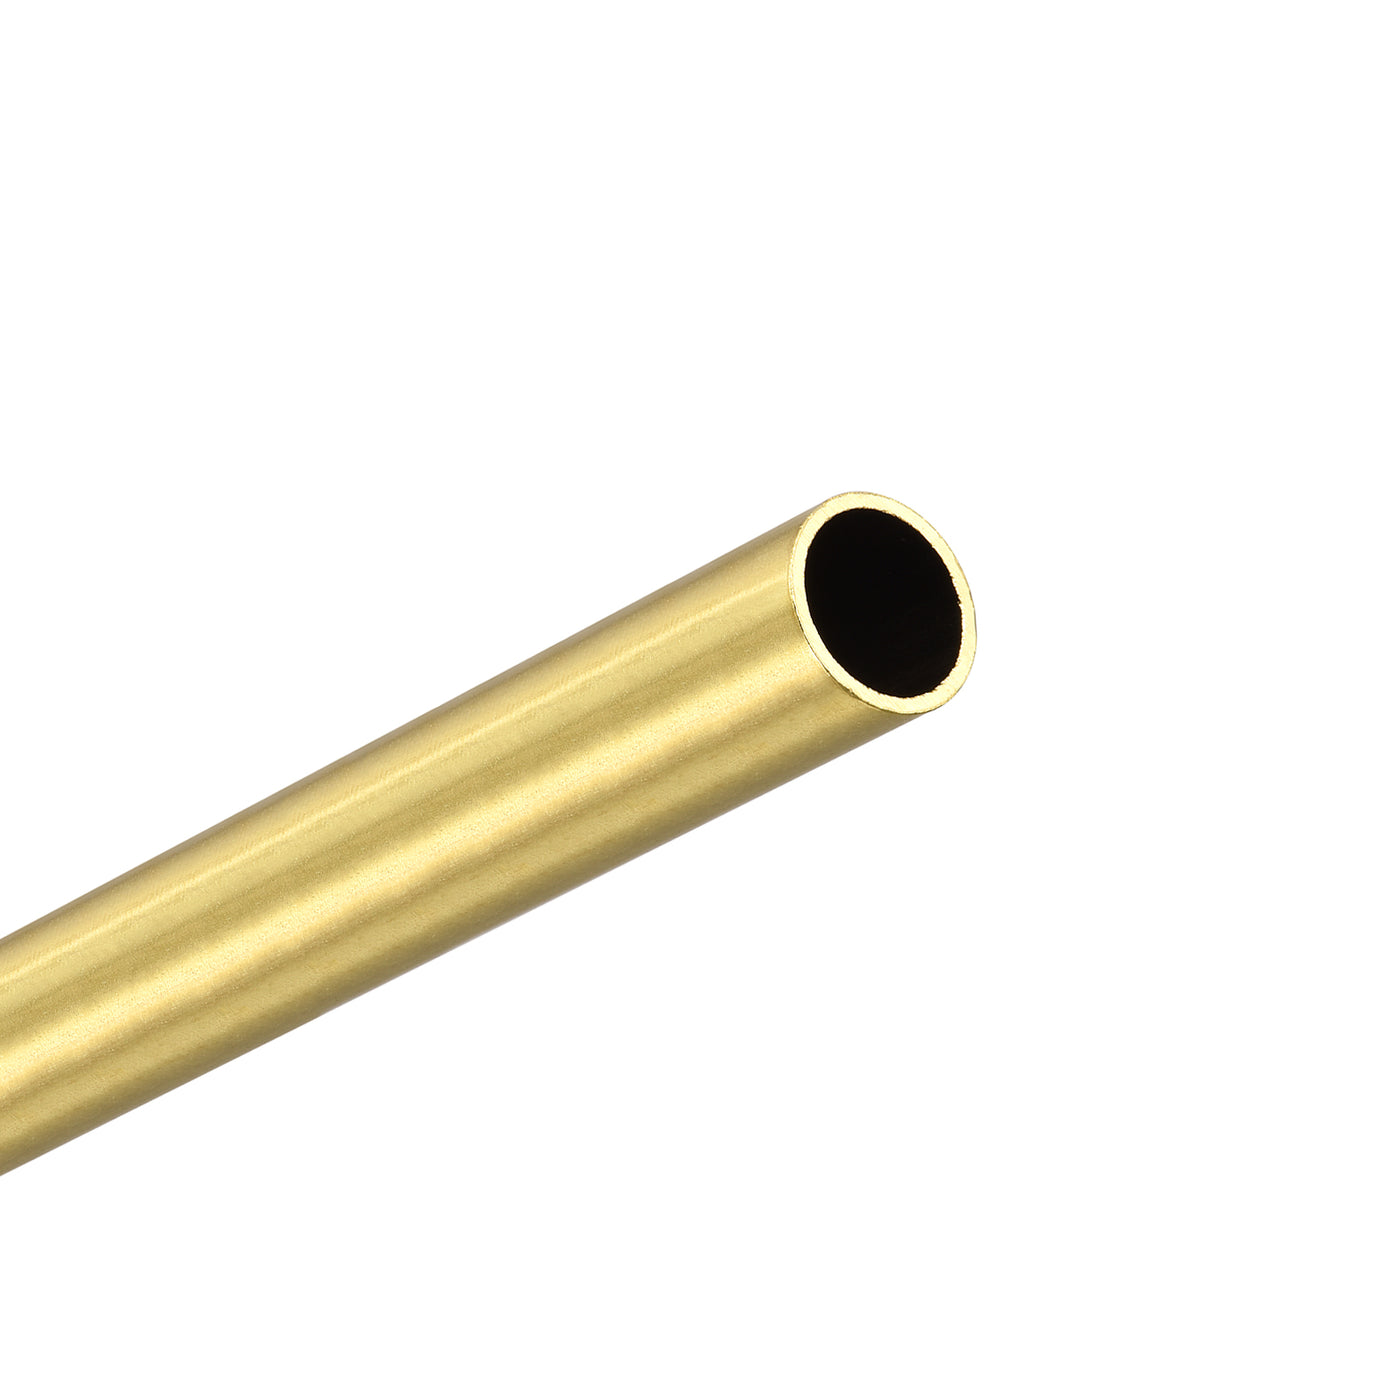 Uxcell Uxcell Brass Round Tube 9.5mm OD 0.25mm Wall Thickness 300mm Length Pipe Tubing 3 Pcs